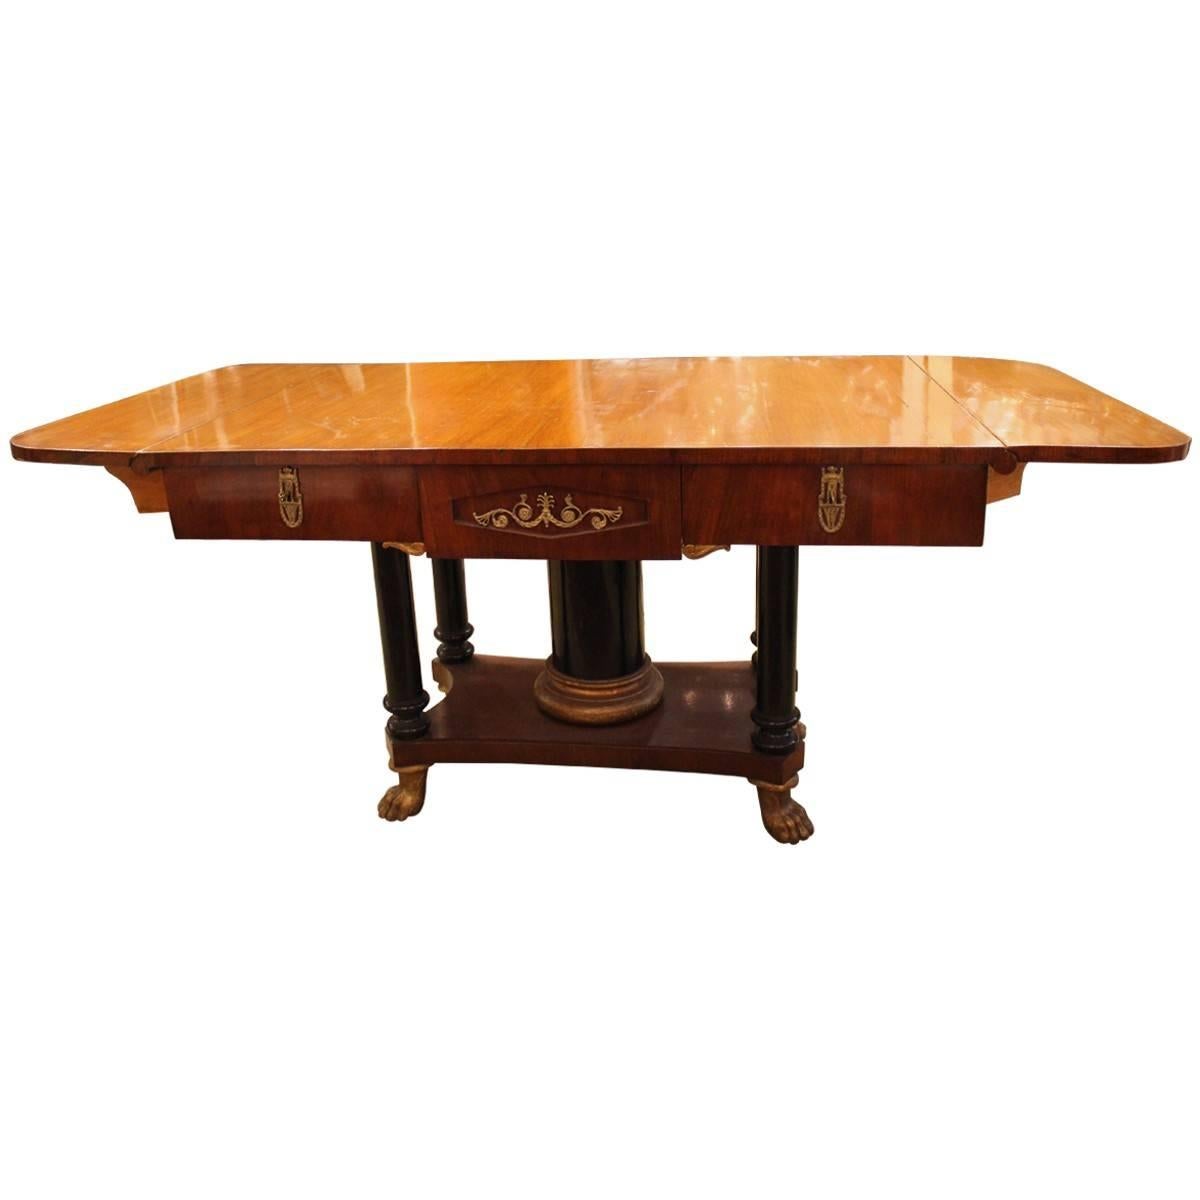 This elegant Biedermeier table is crafted from mahogany with gilt bronze decorative details, column legs, and claw feet. The drop sides accommodate your entertaining needs. Biedermeier gilt bronze-mounted and mahogany drop console table.
There are